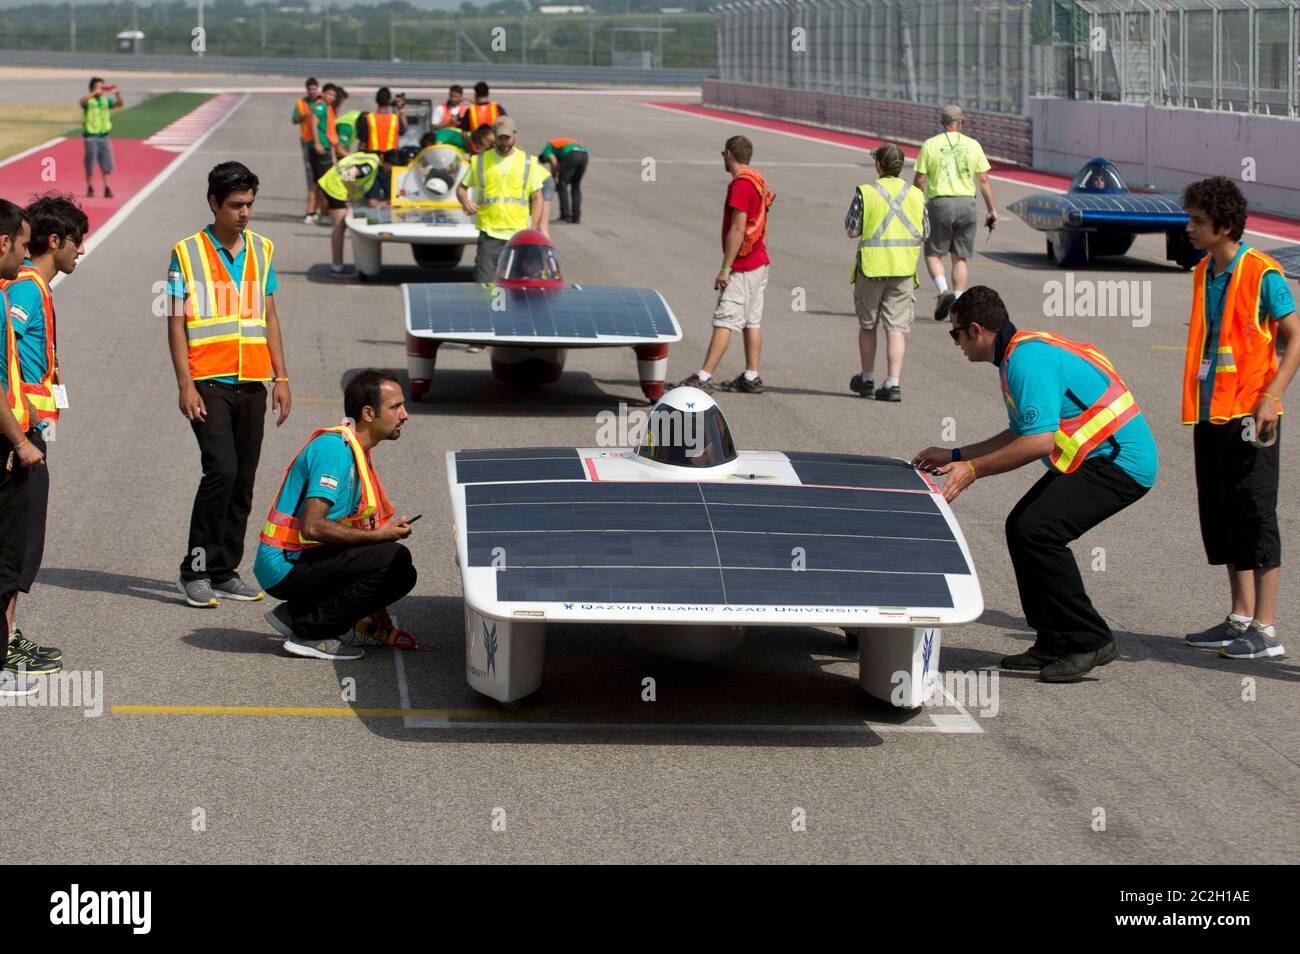 Austin, Texas USA, July 18 , 2014: Iranian students from Qazvin Islamic Azad University ready their car, Havin 2 during qualifying races for the 1,700-mile American Solar Challenge race at Circuit of the Americas racetrack outside Austin. The event features 21 college solar car teams from across the U.S, Canada, Puerto Rico and Iran. ©Bob Daemmrich Stock Photo